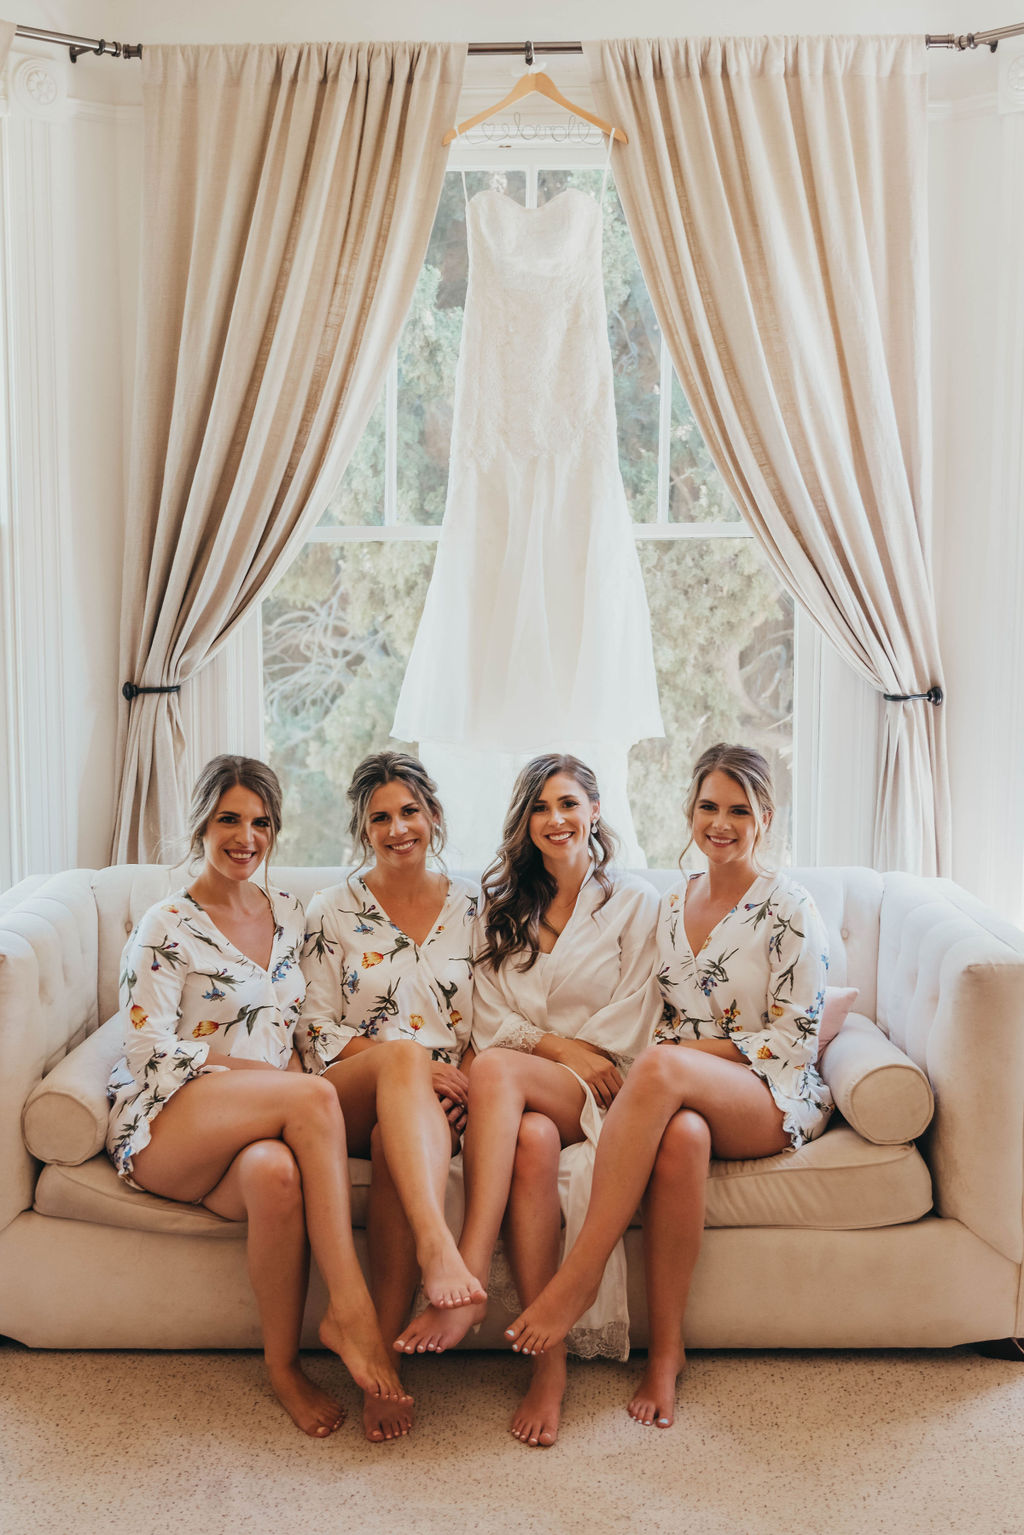 Bridesmaids in getting ready outfits matching floral robes laugh and converse on a white couch in a brightly lit room with large windows.